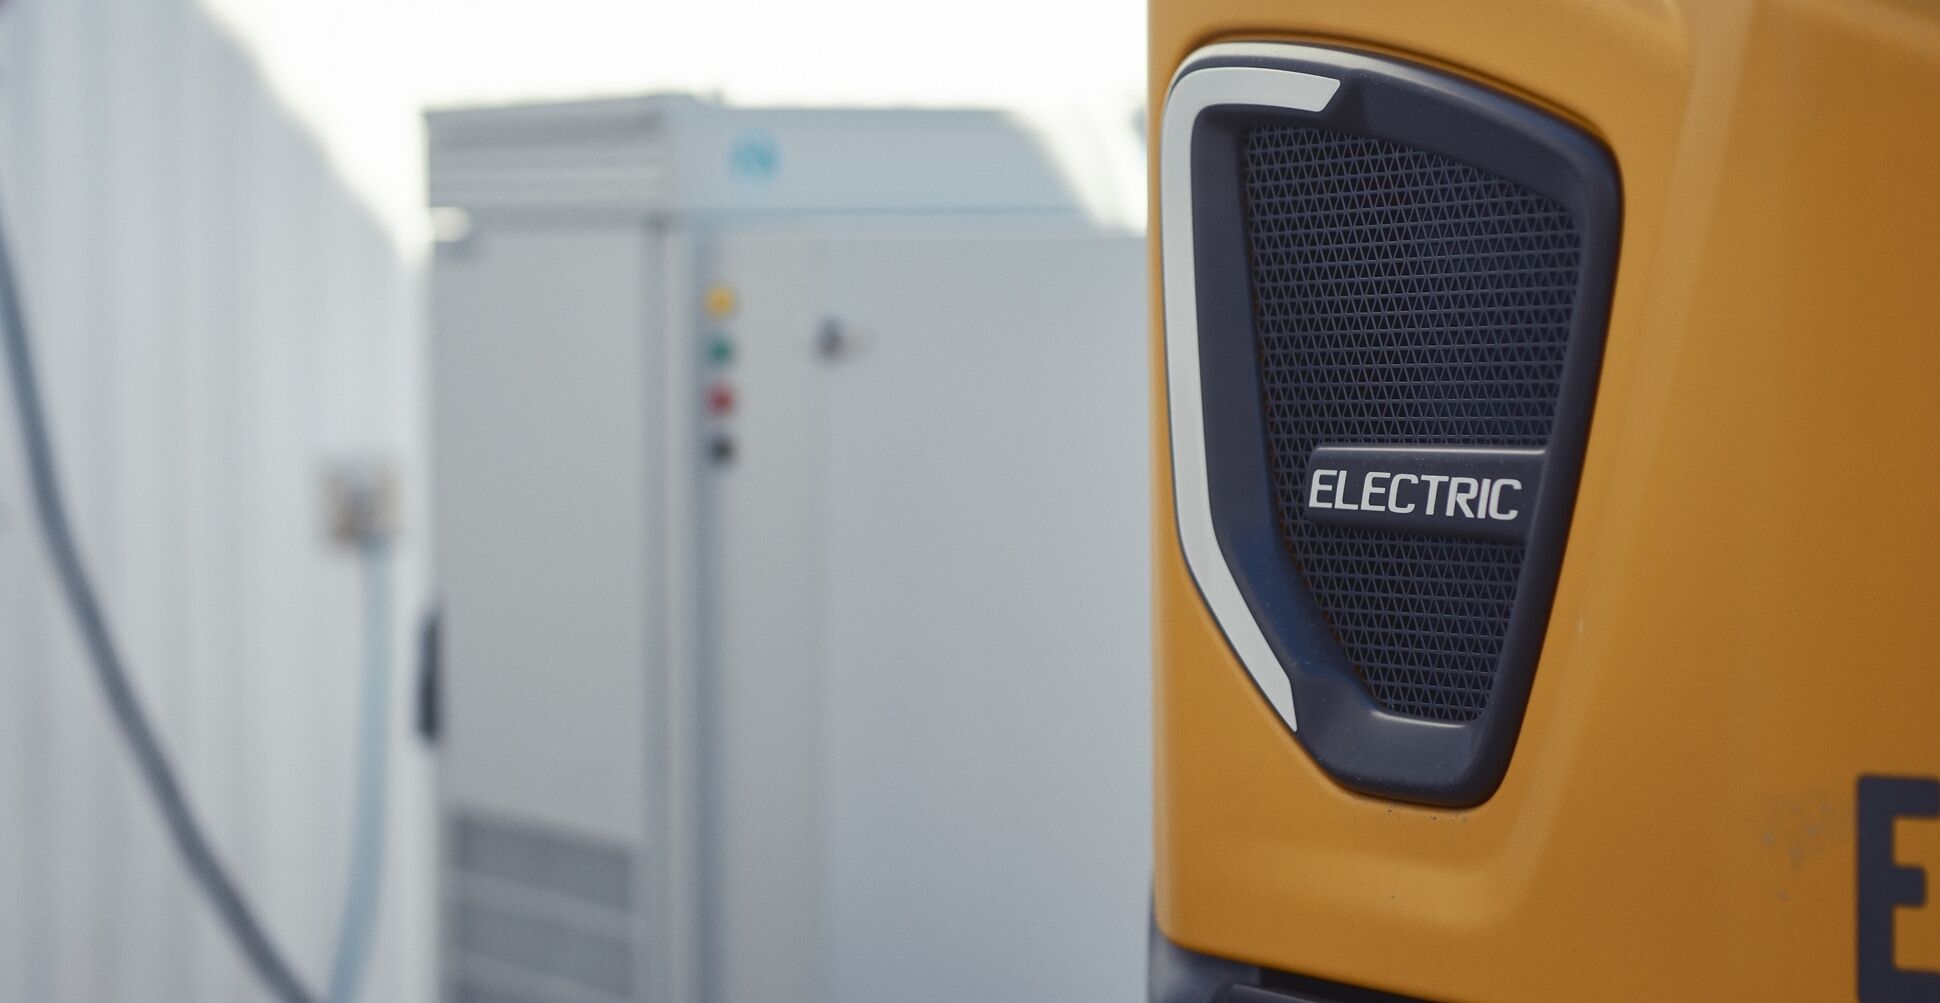 volvo-ce-reveals-electric-charging-protocol-to-accelerate-transformation-01.jpeg